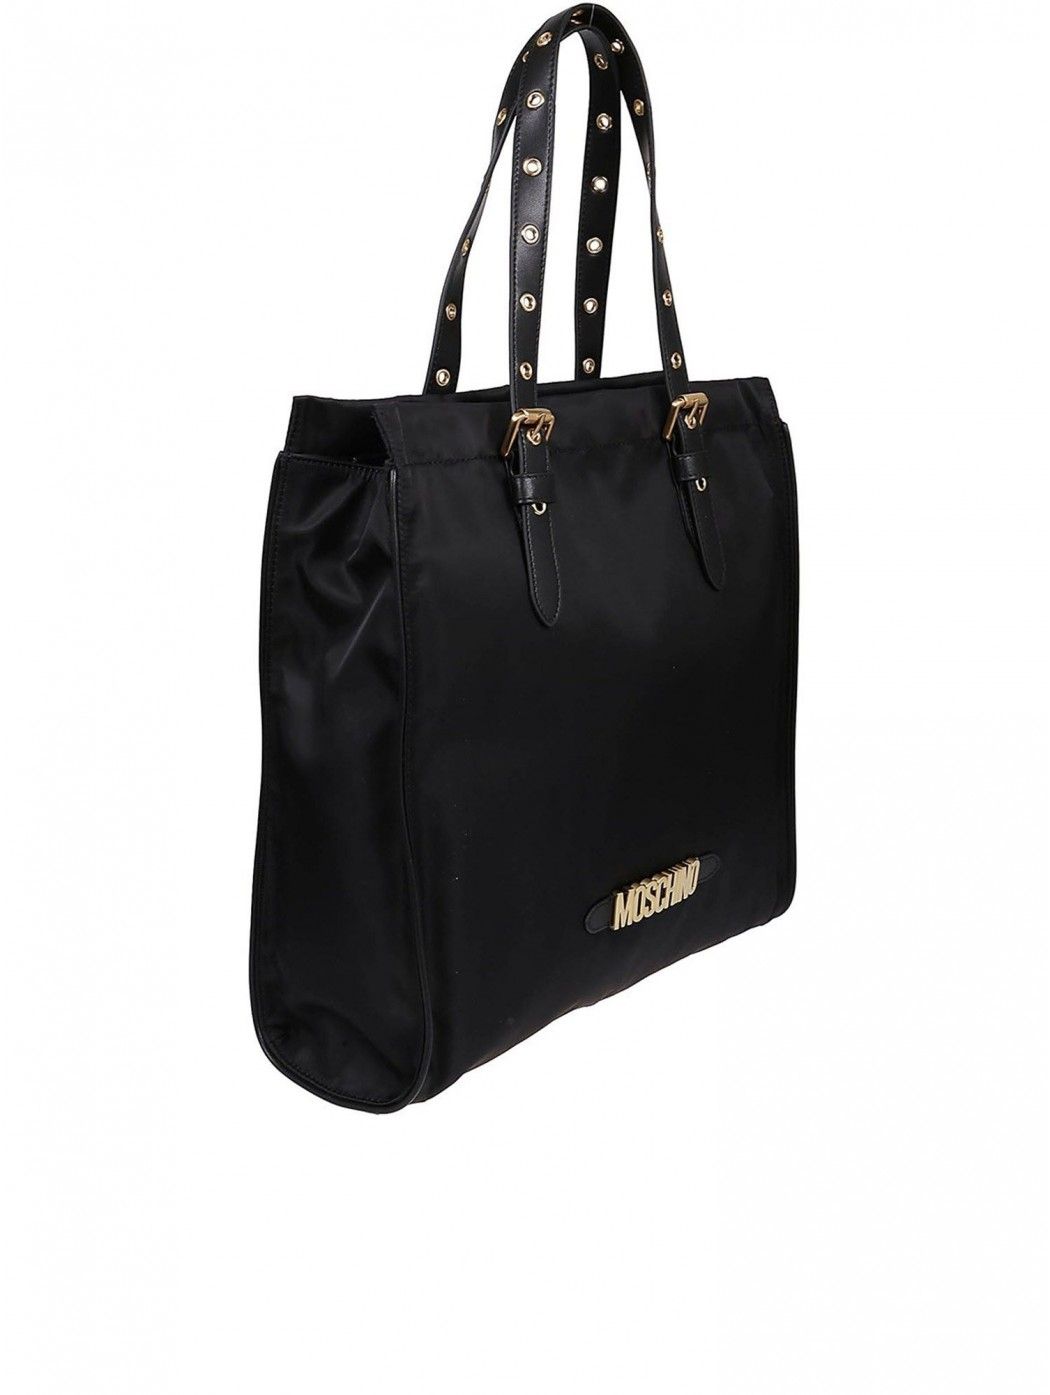 Nylon tote with adjustable handles with buckle, metal logo patch one compartment inside pocket and zip closure on top Brand colo